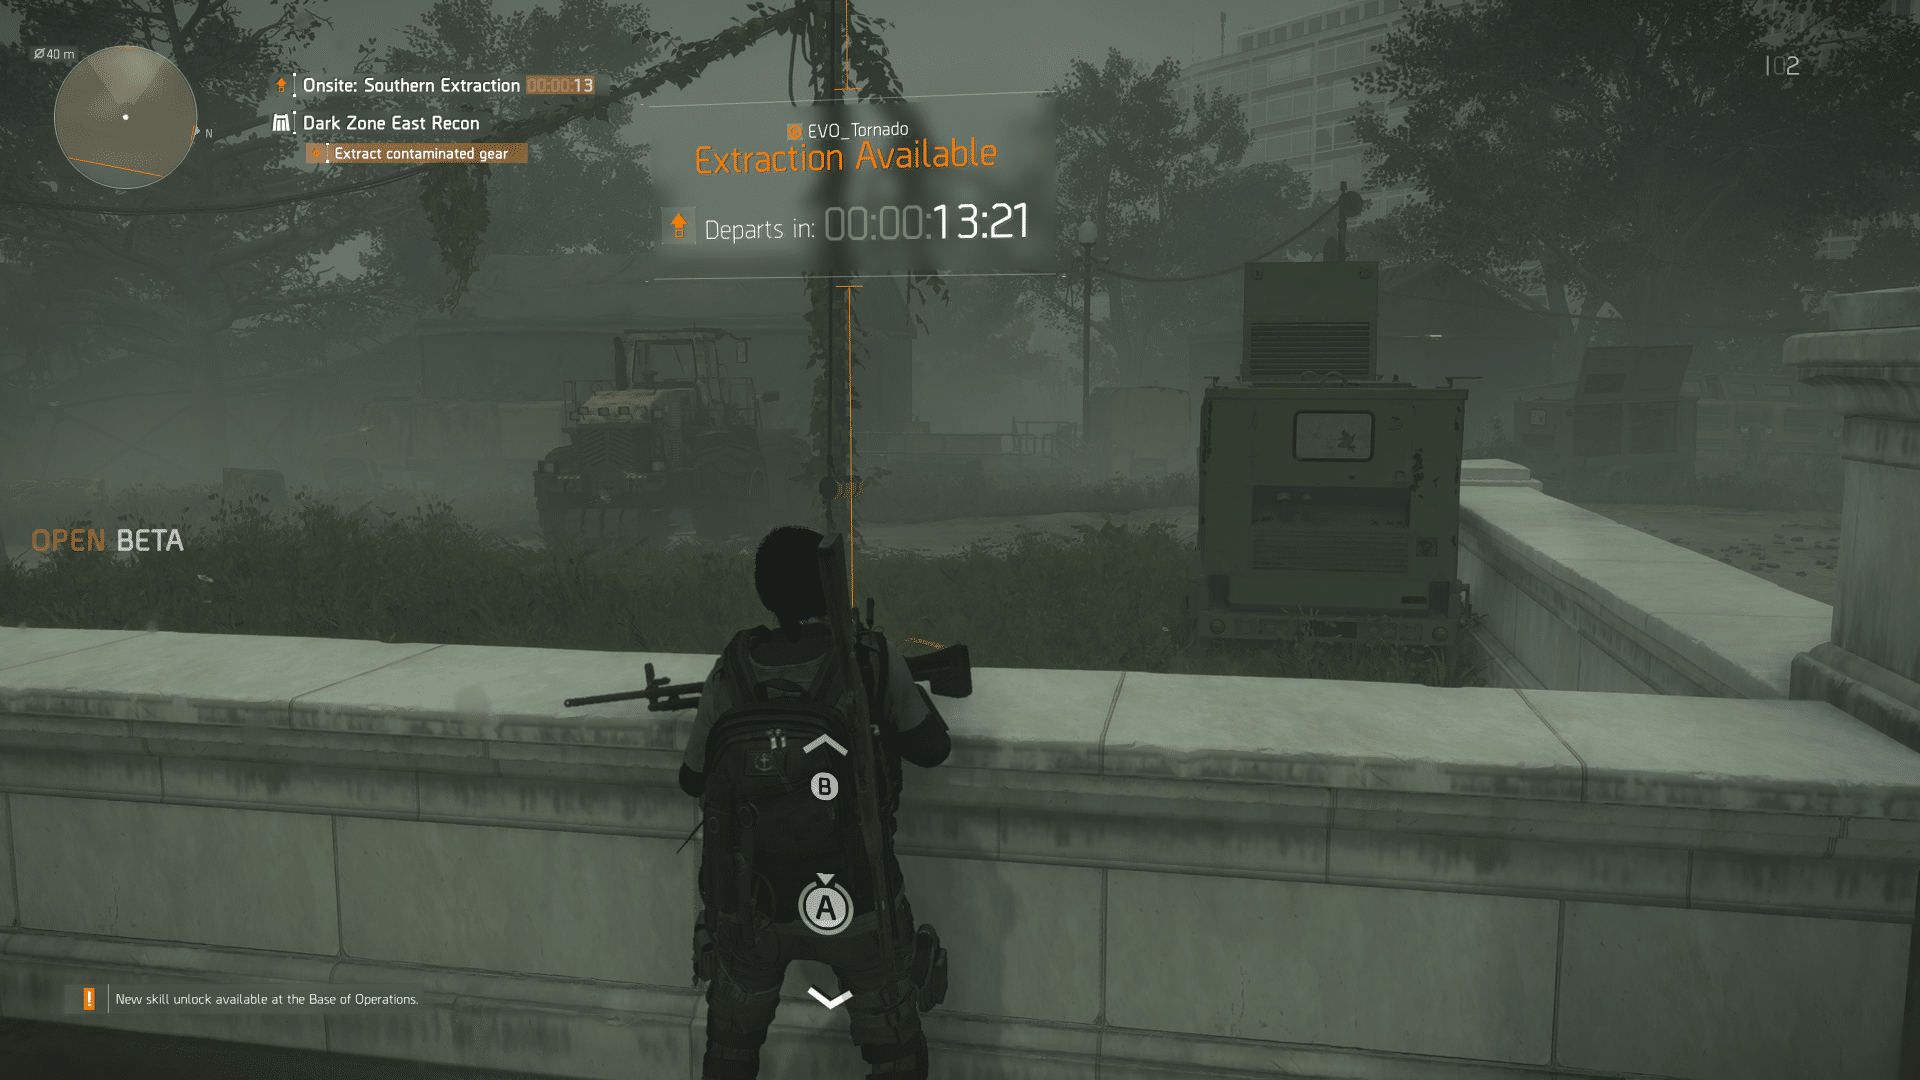 TheDivision2 3 4 2019 8 57 36 PM 746